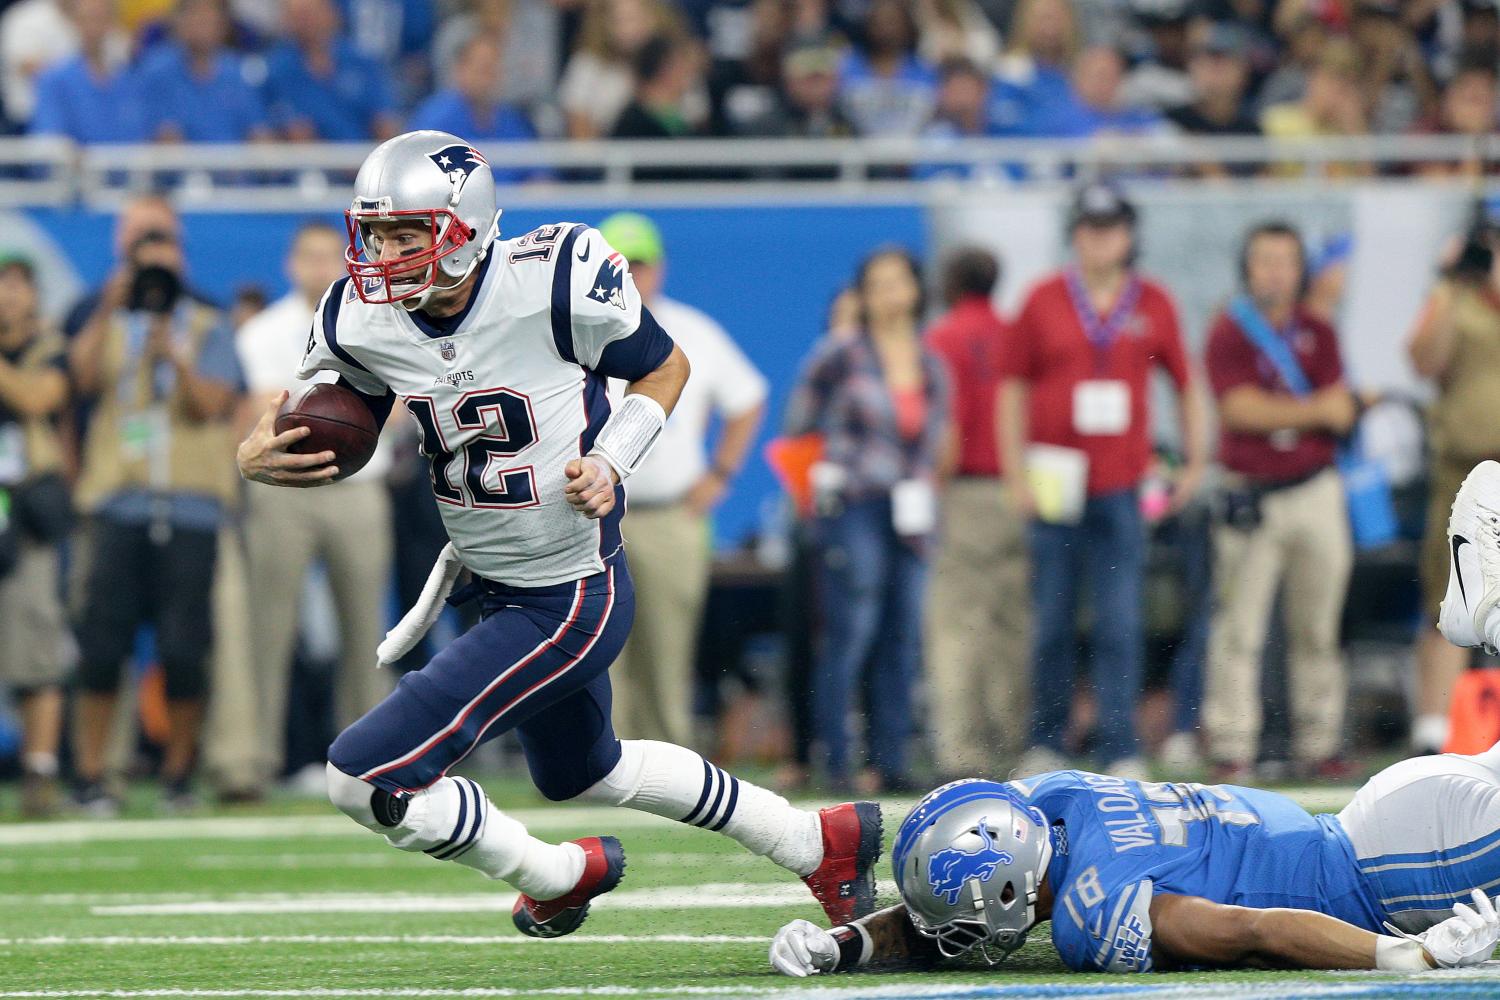 New England Patriots quarterback Tom Brady (12) runs the ball during the first half of an NFL football game against the Detroit Lions in Detroit, Michigan USA, on Friday, August 25, 2017.